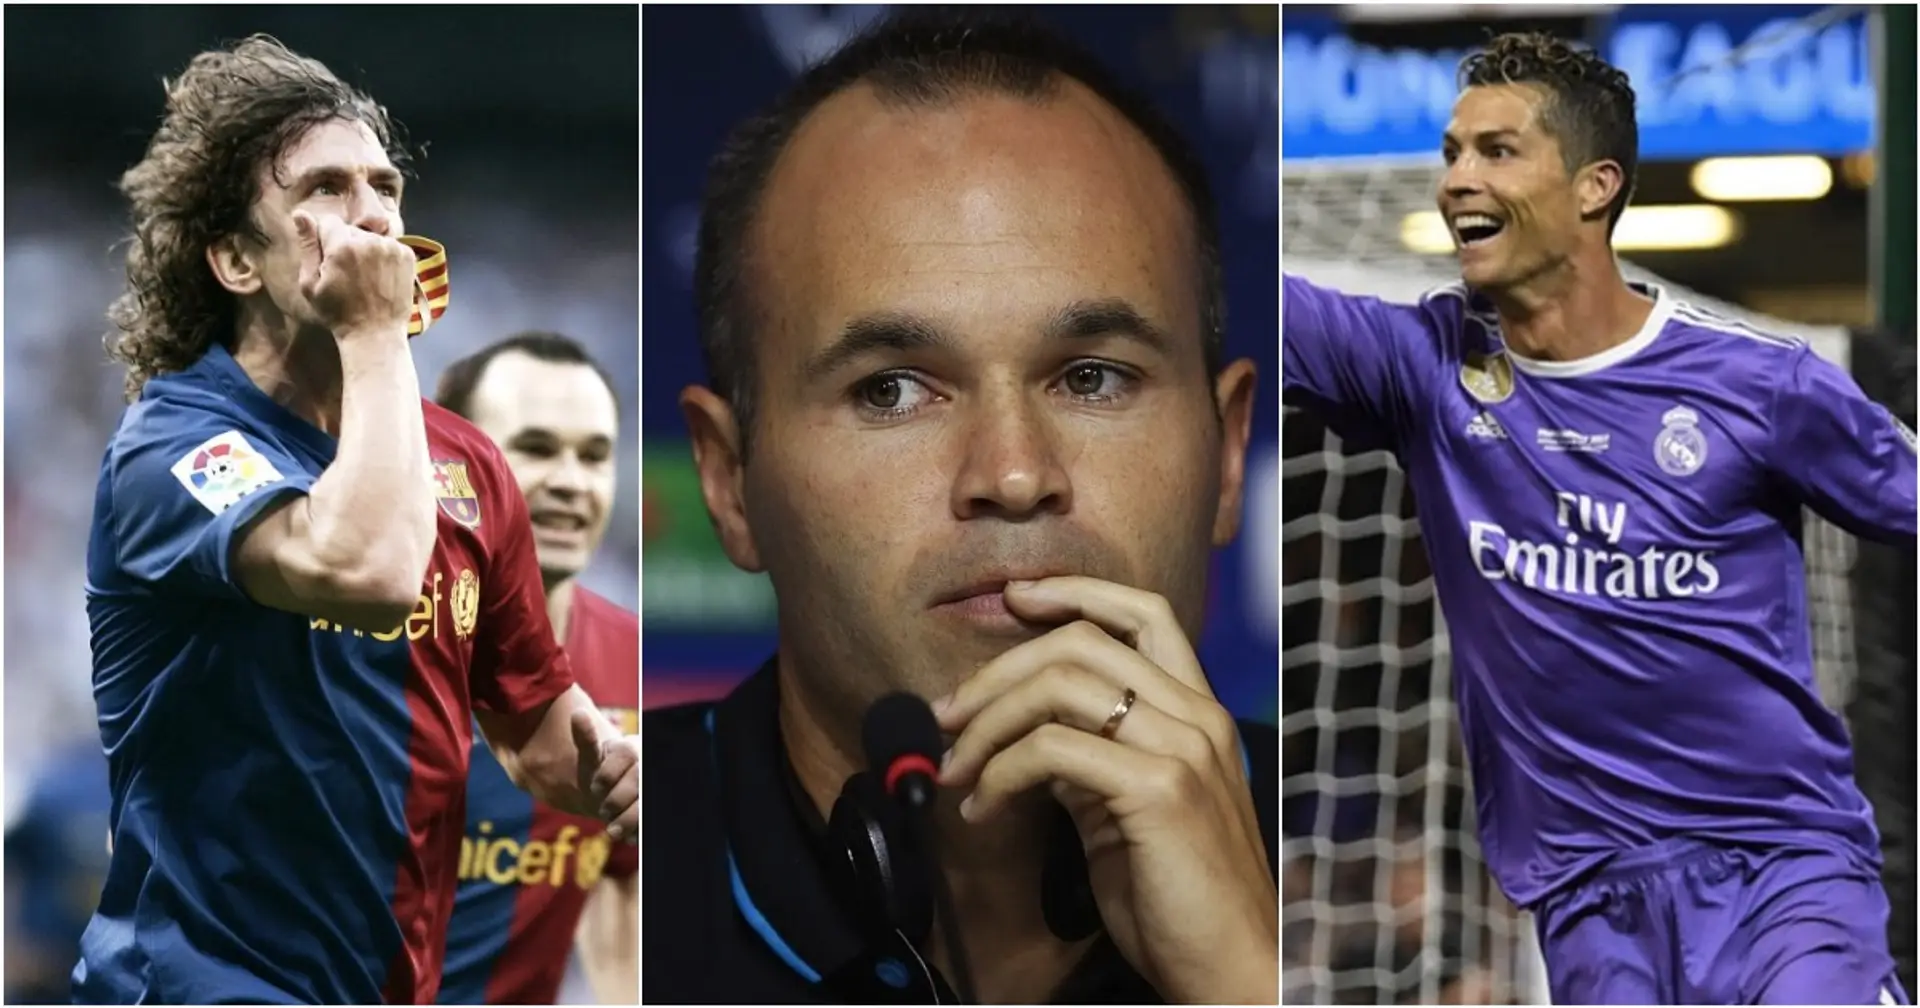 Ultimate player according to Iniesta: 1/6 Atleti, 1/6 Madrid and 4/6 Barca